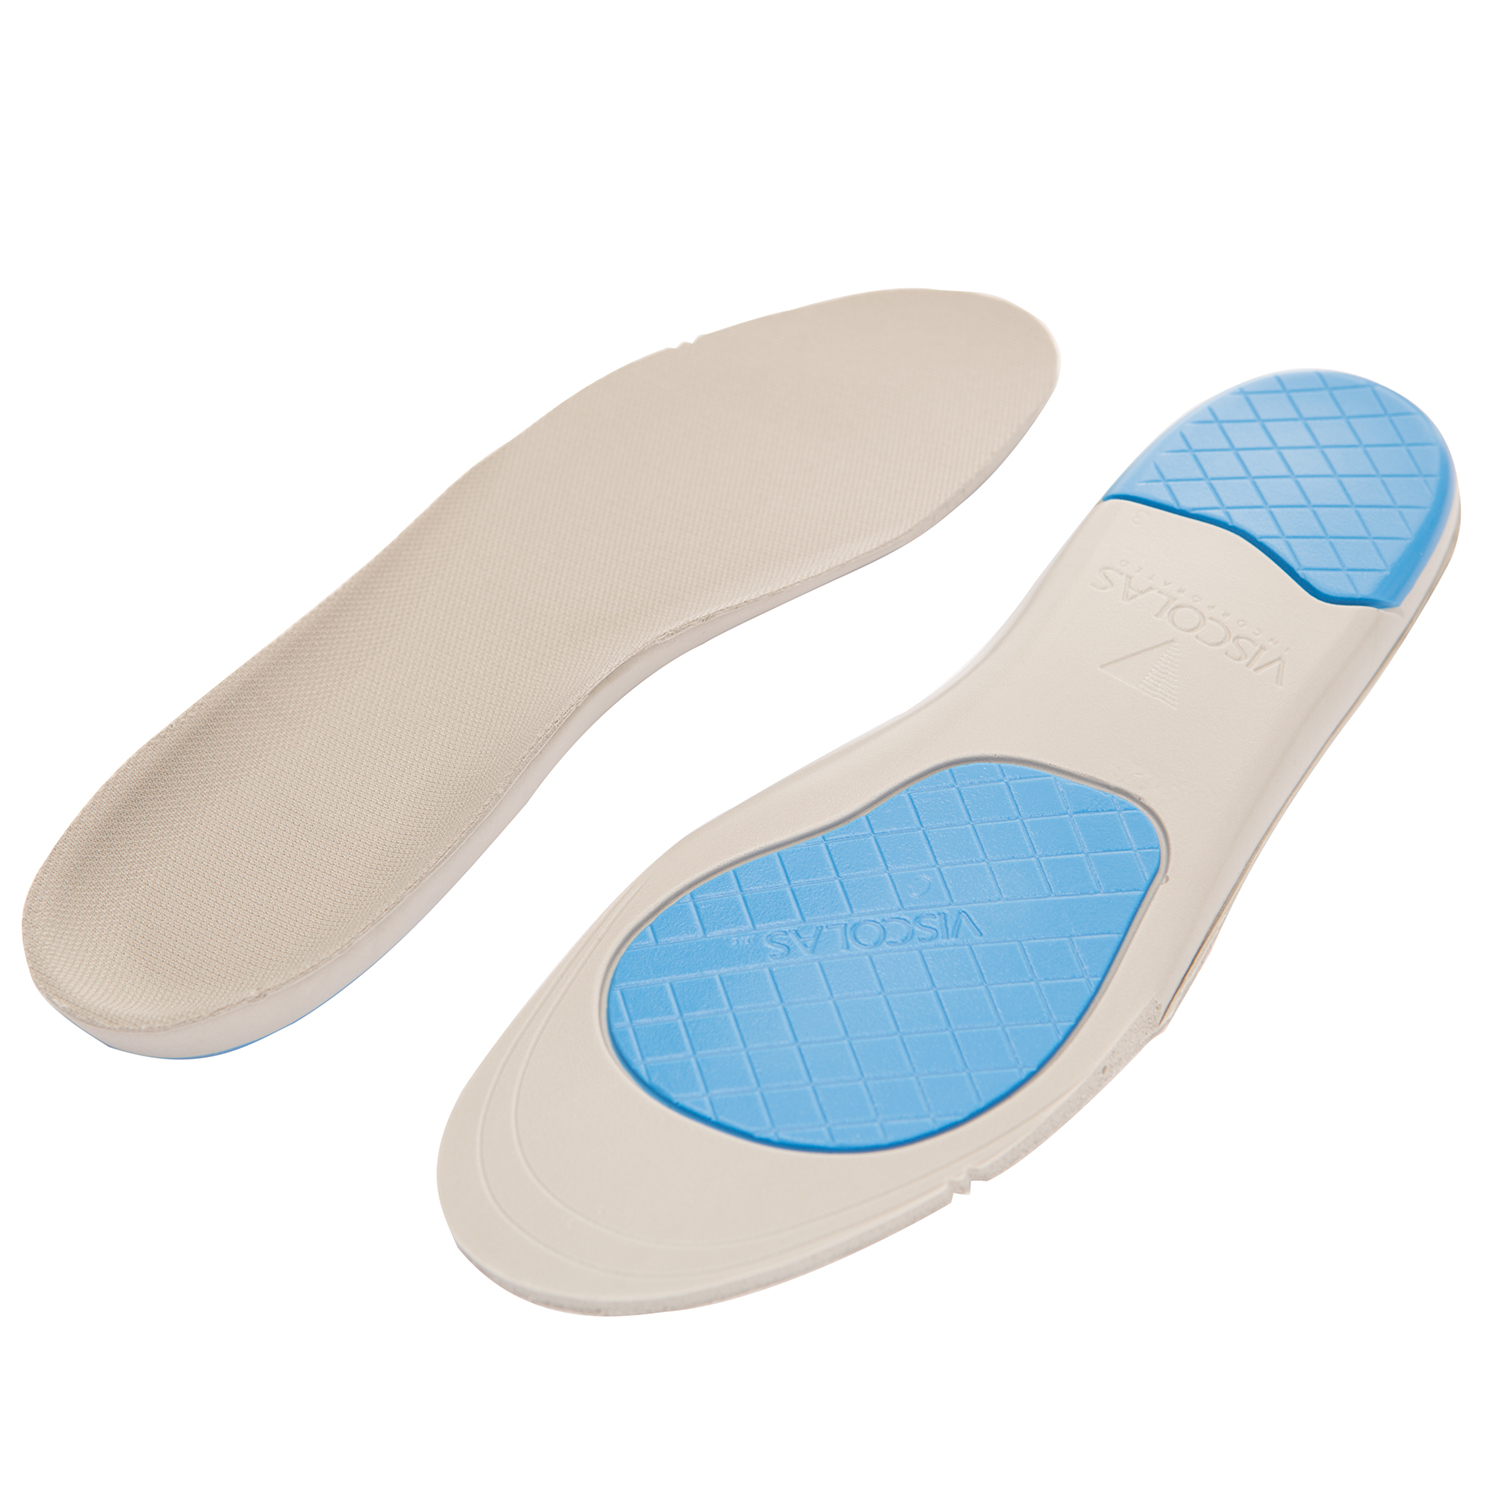 IMPACTO ULTRA PERFORMER INSOLE C M8-10 W10-12 - Insoles